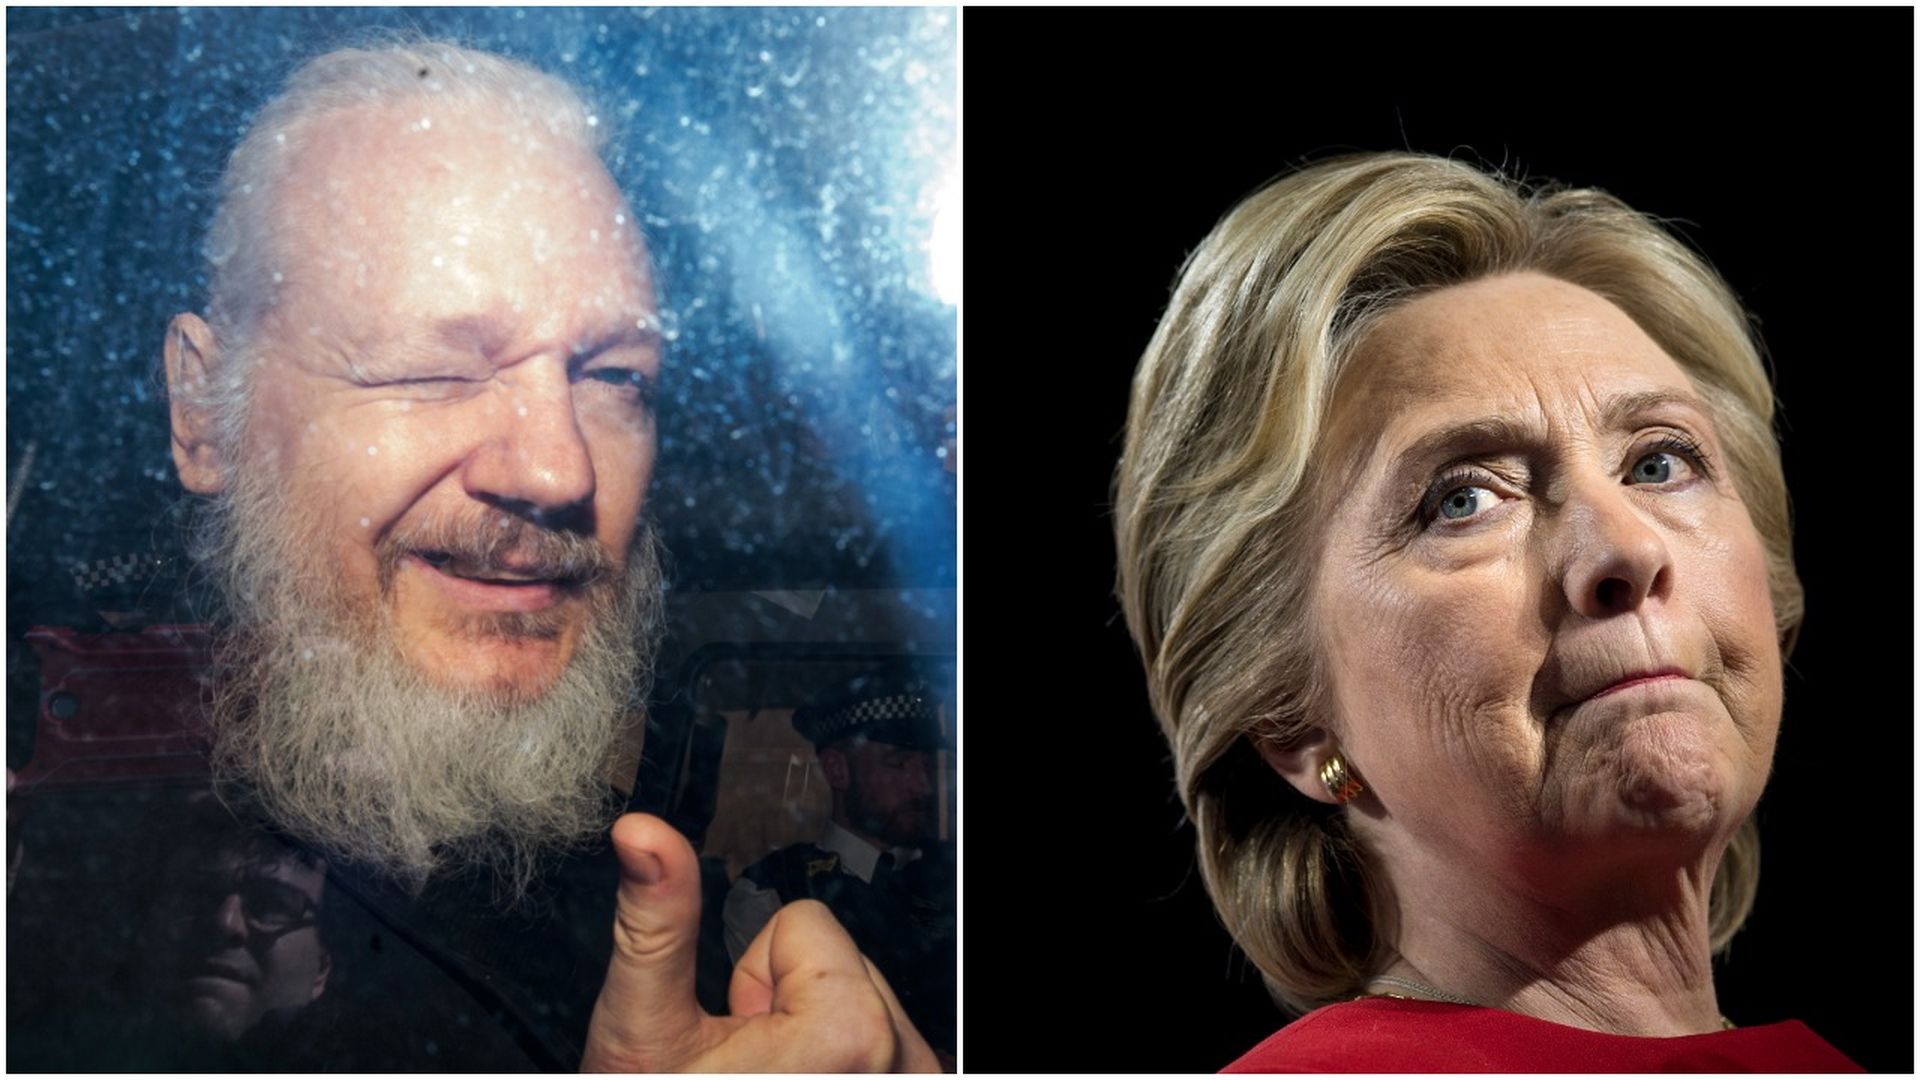 This image is a split screen of Julian Assange giving reporters a thumbs up and Hillary Clinton looking concerned.